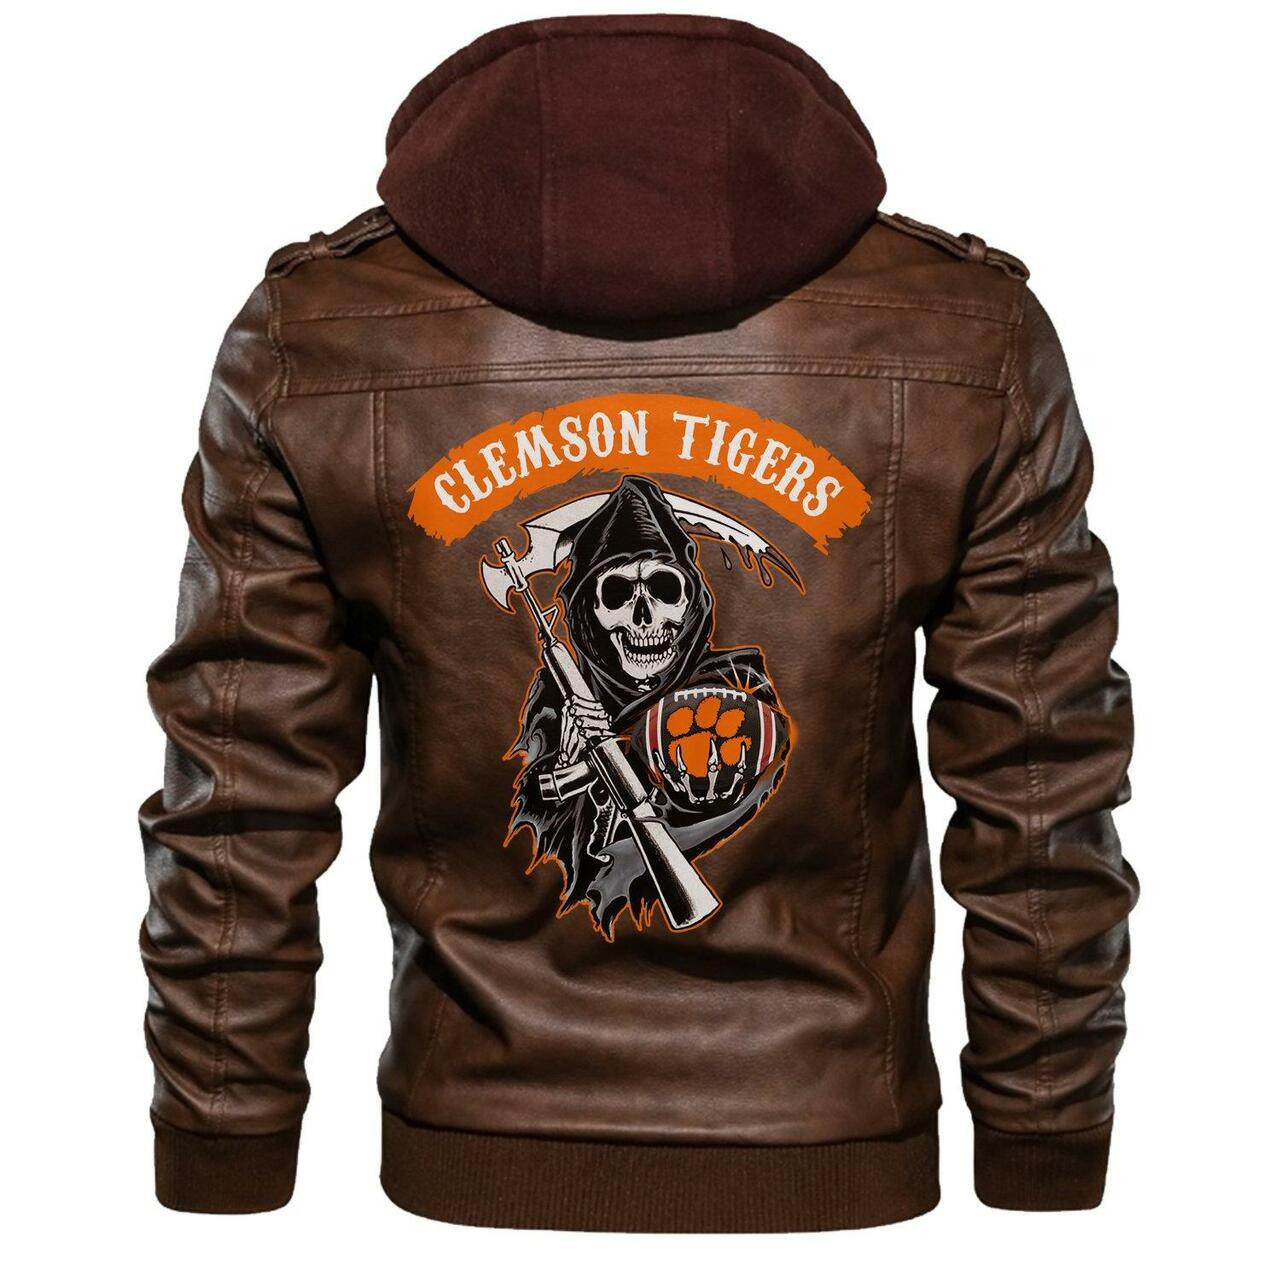 Don't wait another minute, Get Hot Leather Jacket today 78